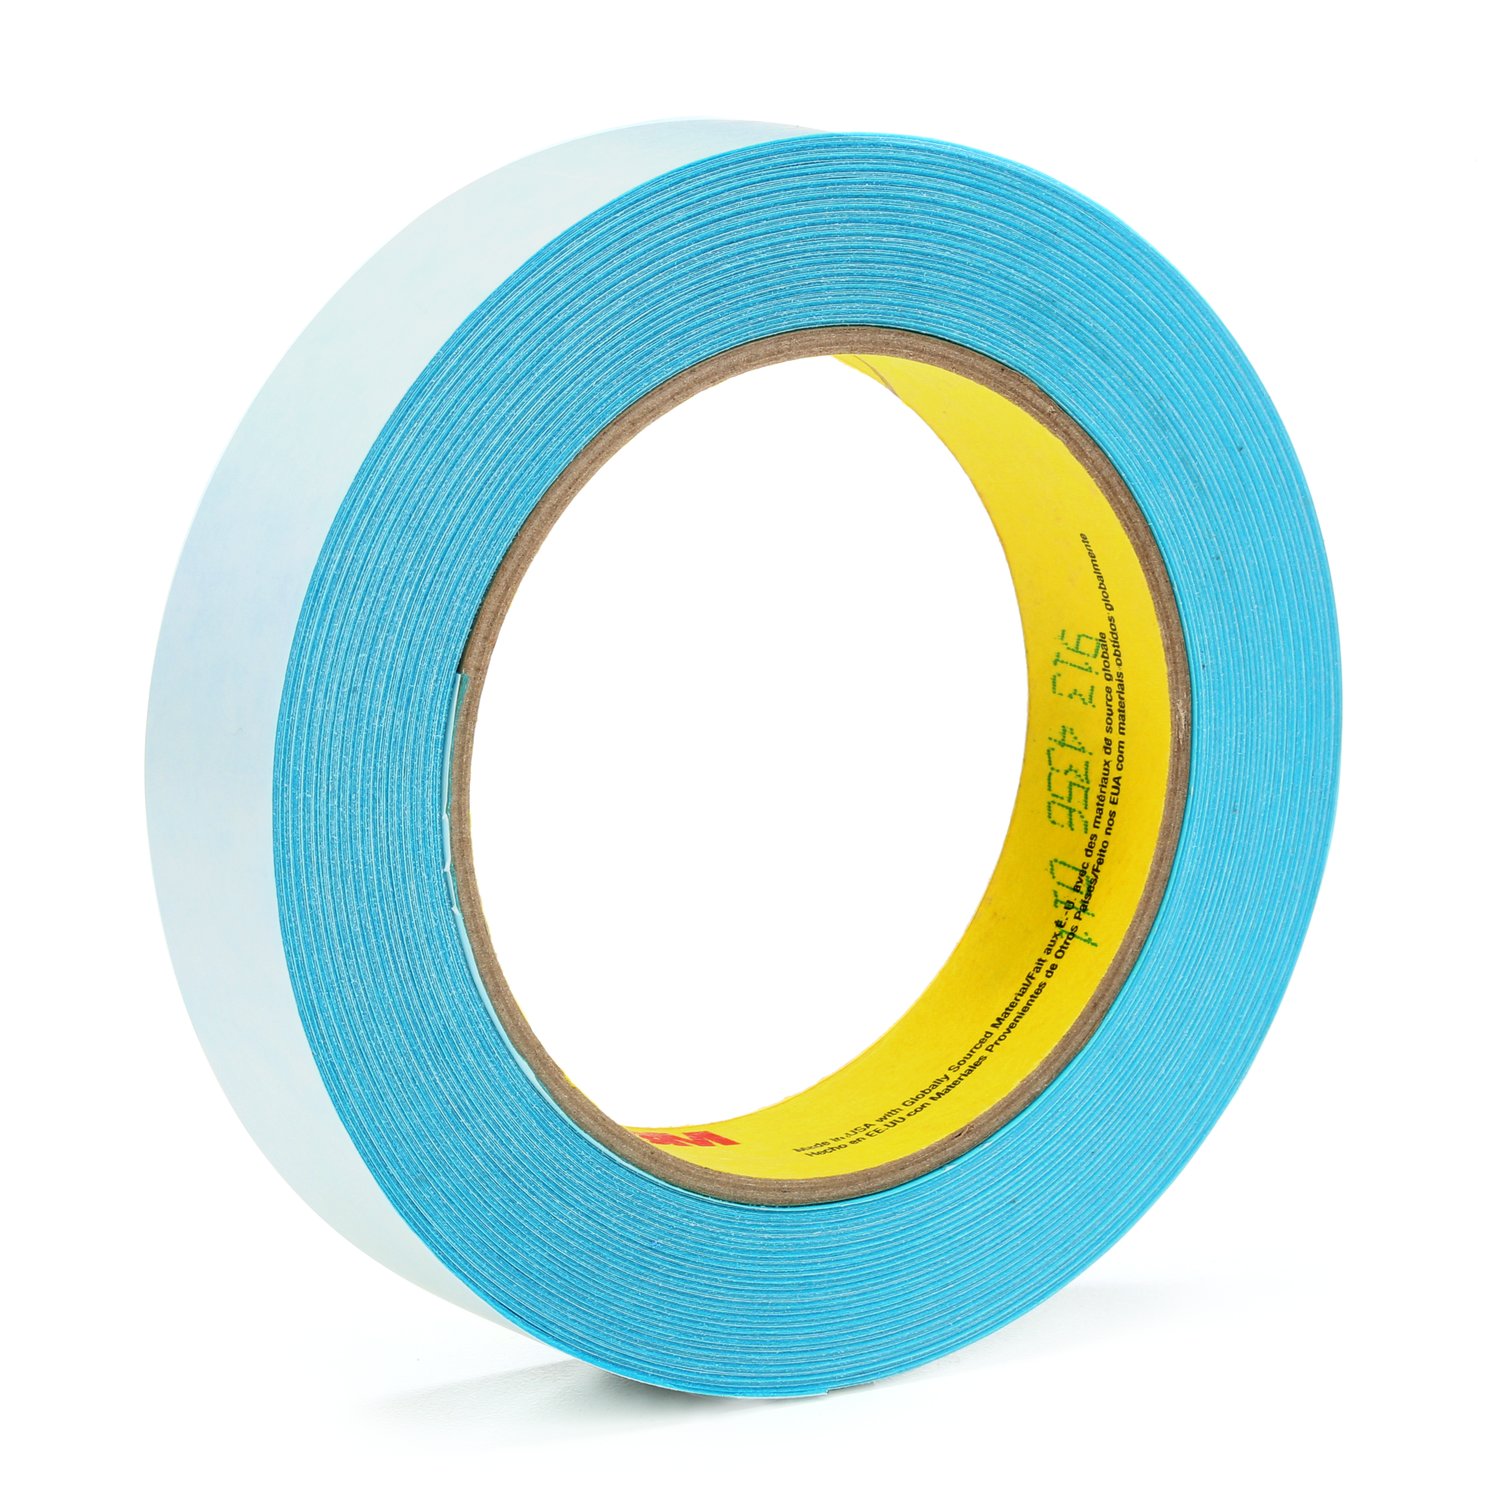 7100027391 - 3M Repulpable Double Coated Flying Splice Tape 913, Blue, 12 mm x 33 m,
3 mil, 72 rolls per case